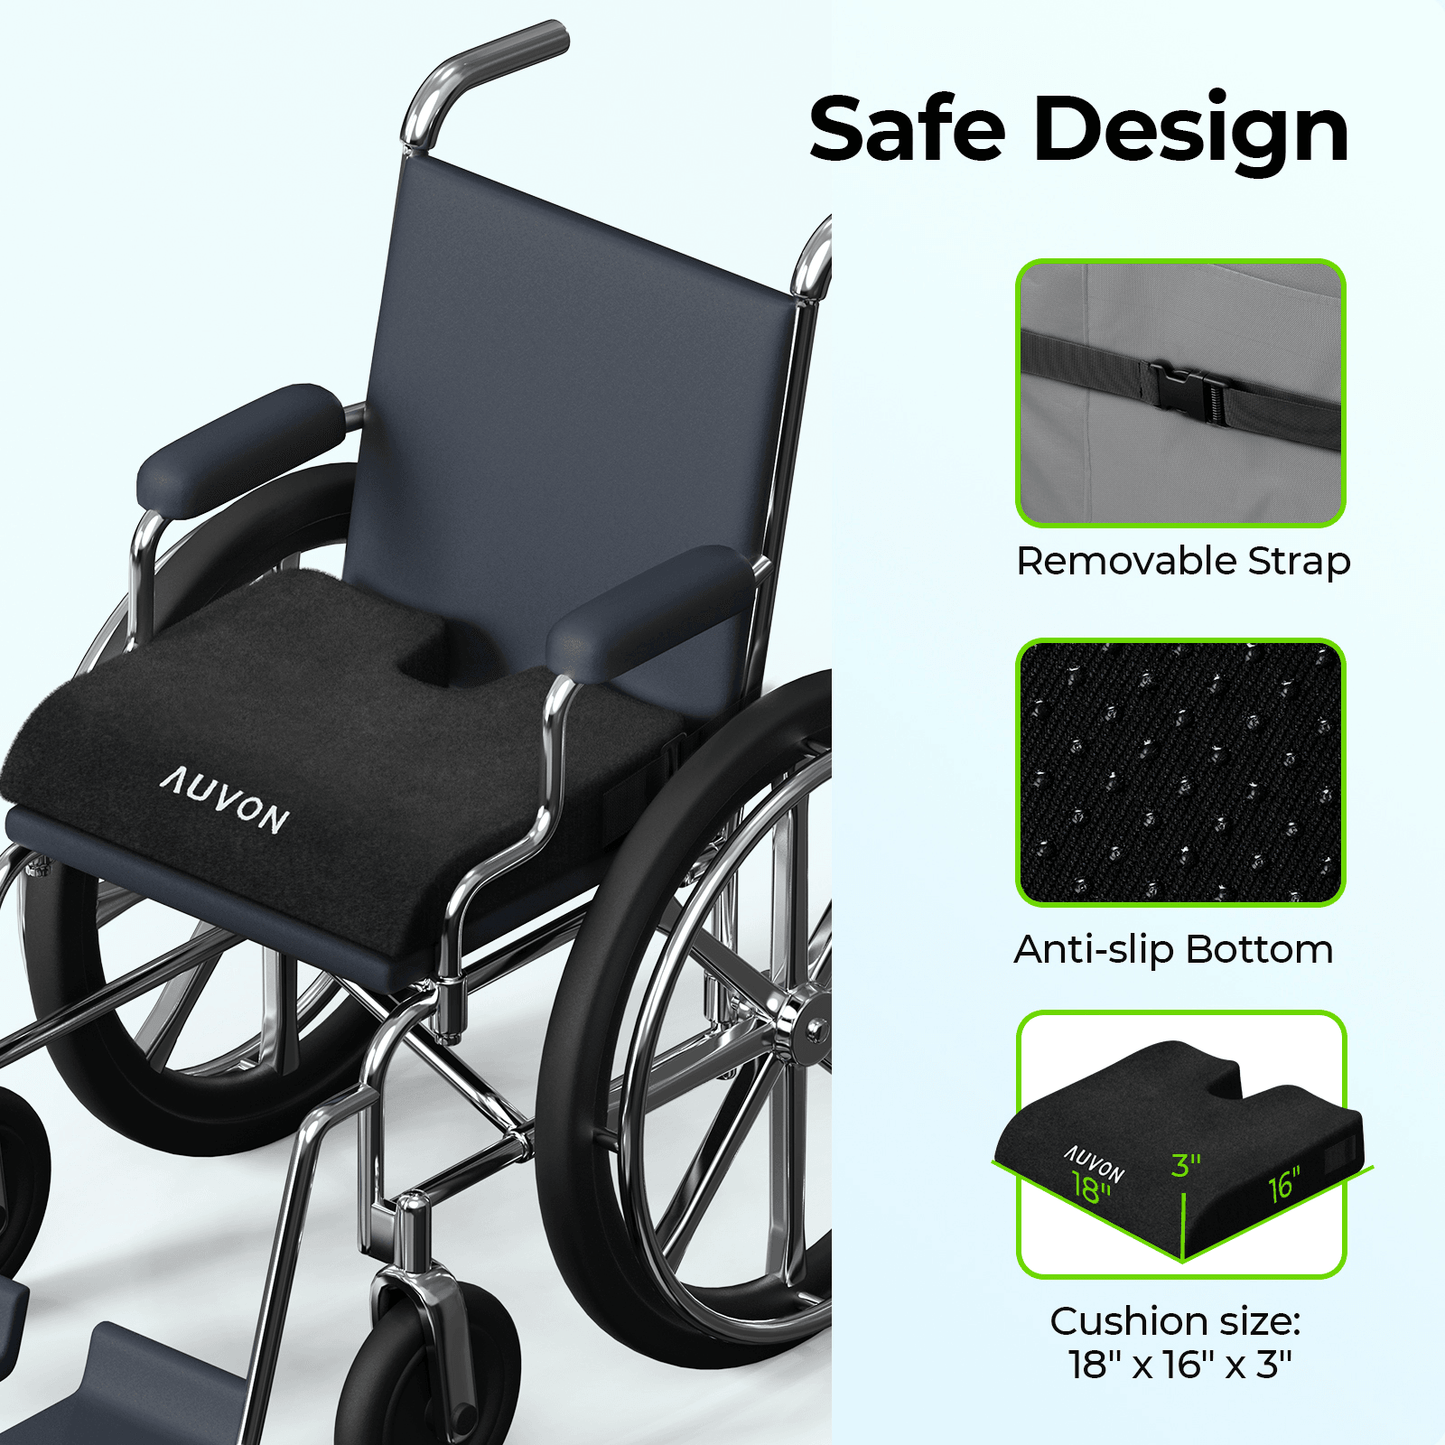 Wheelchair Cushions ,Tailbone&Back Support ,Armrests Comfortable Wheelchair  Accessories ,Prevent Pressure Sore, Non-Slip 4 Straps(Navy)